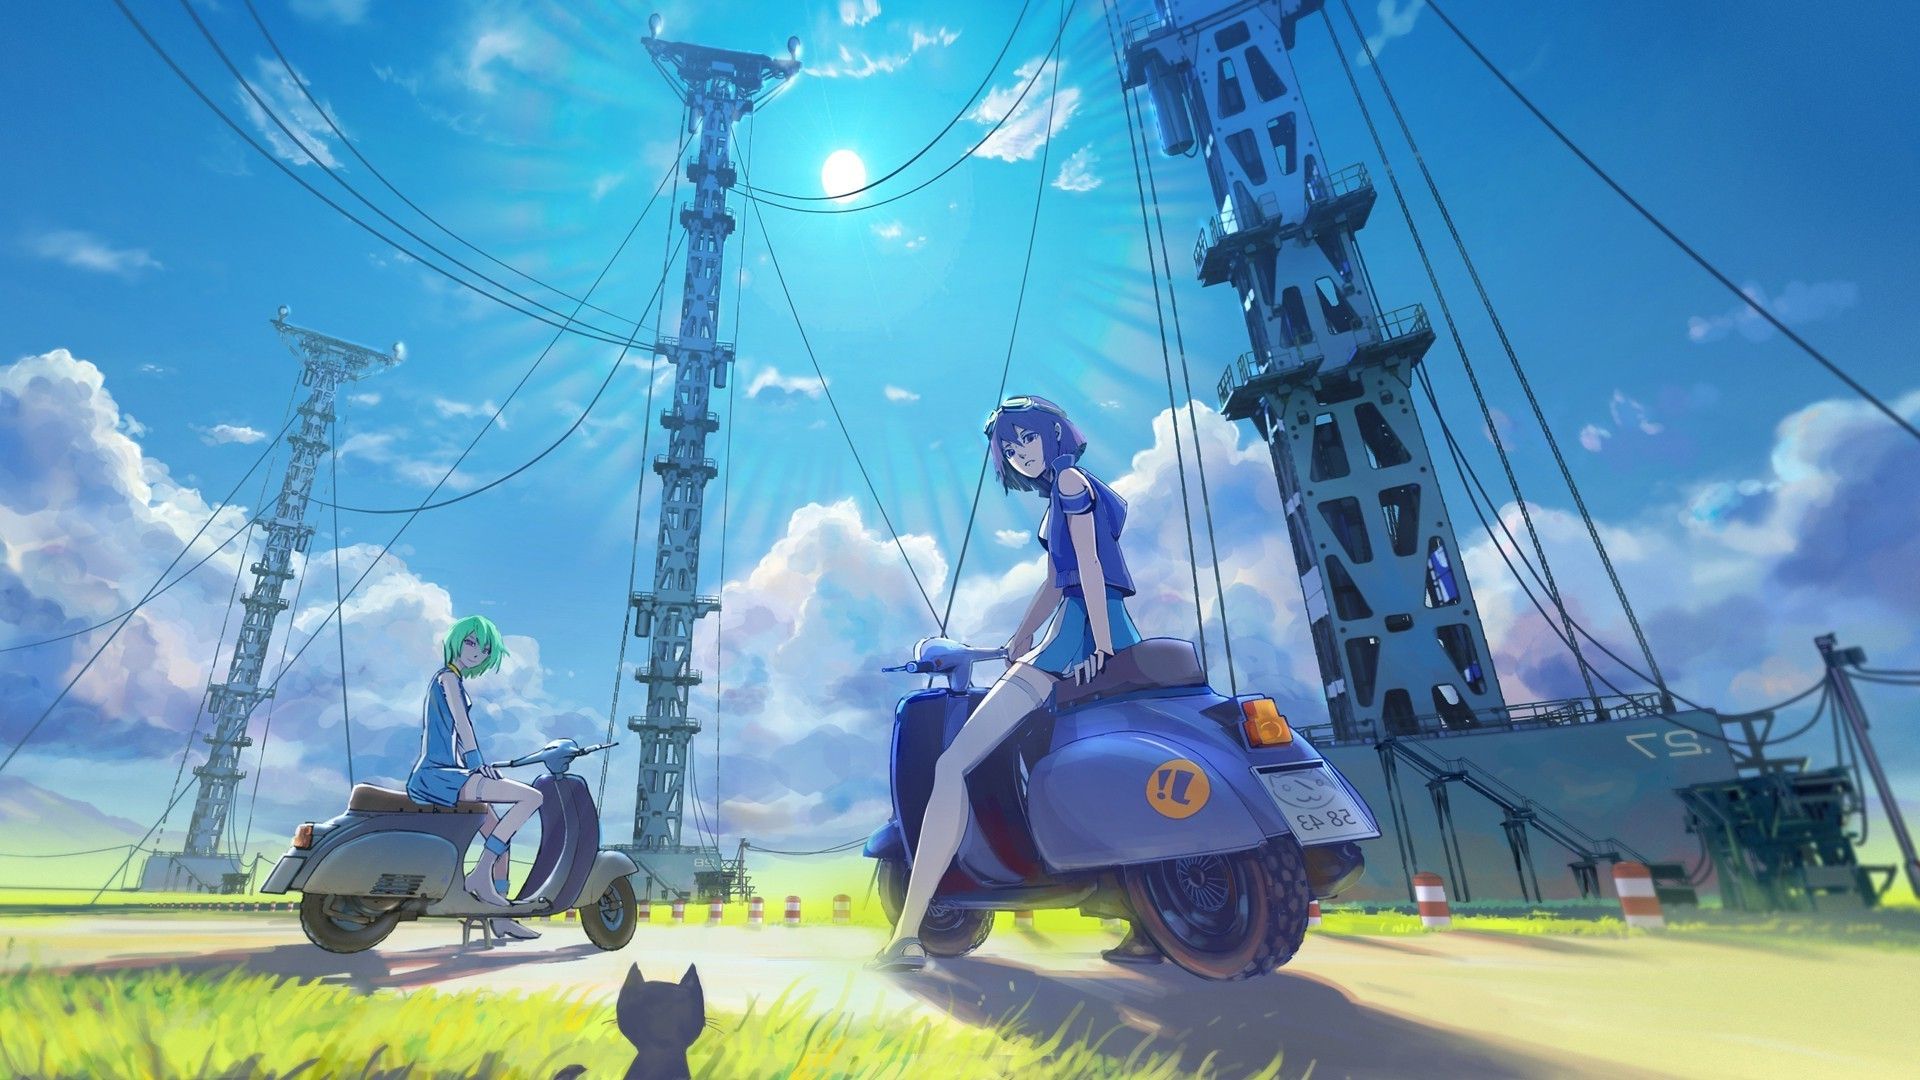 Two anime girls on a scooter wallpaper - Anime landscape